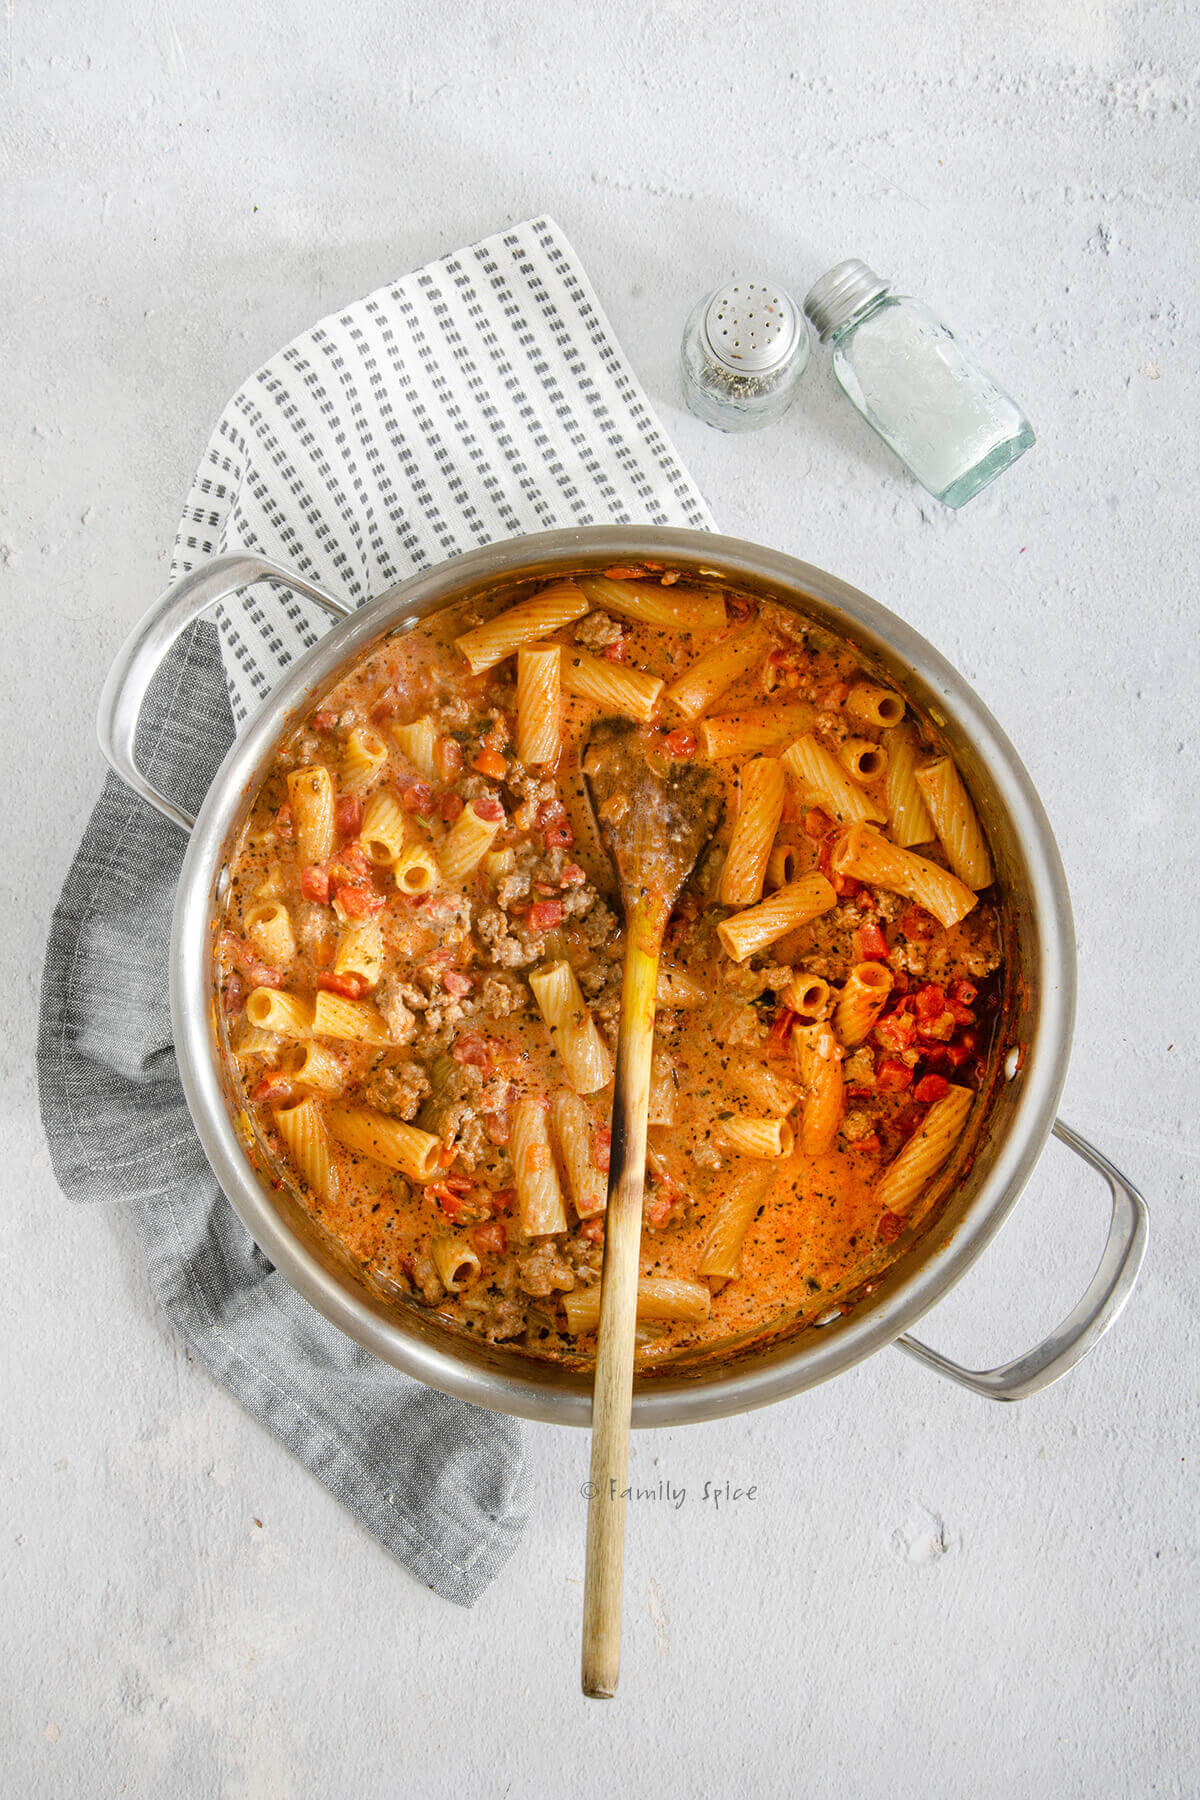 Bolognese sauce with partially cooked rigatoni in a stainless pot